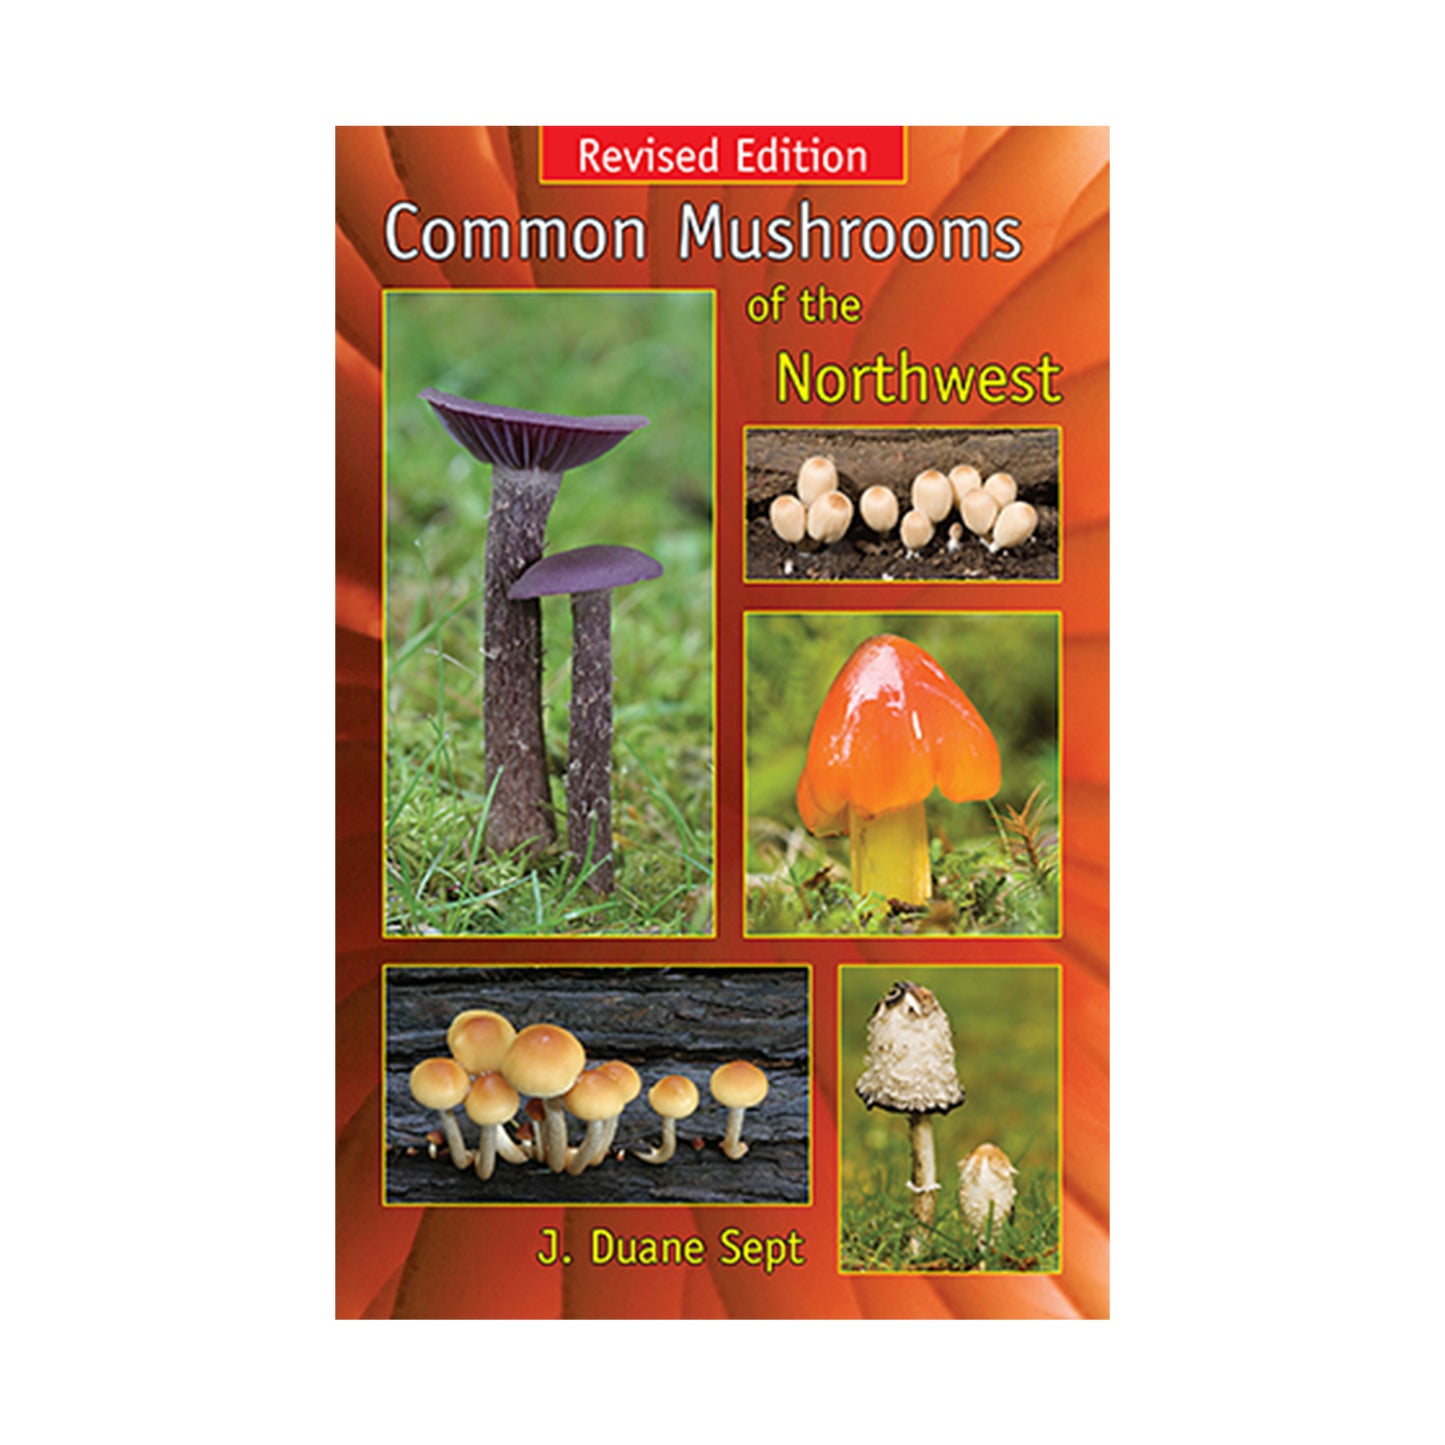 Common Mushrooms of the Northwest by J Duane Sept